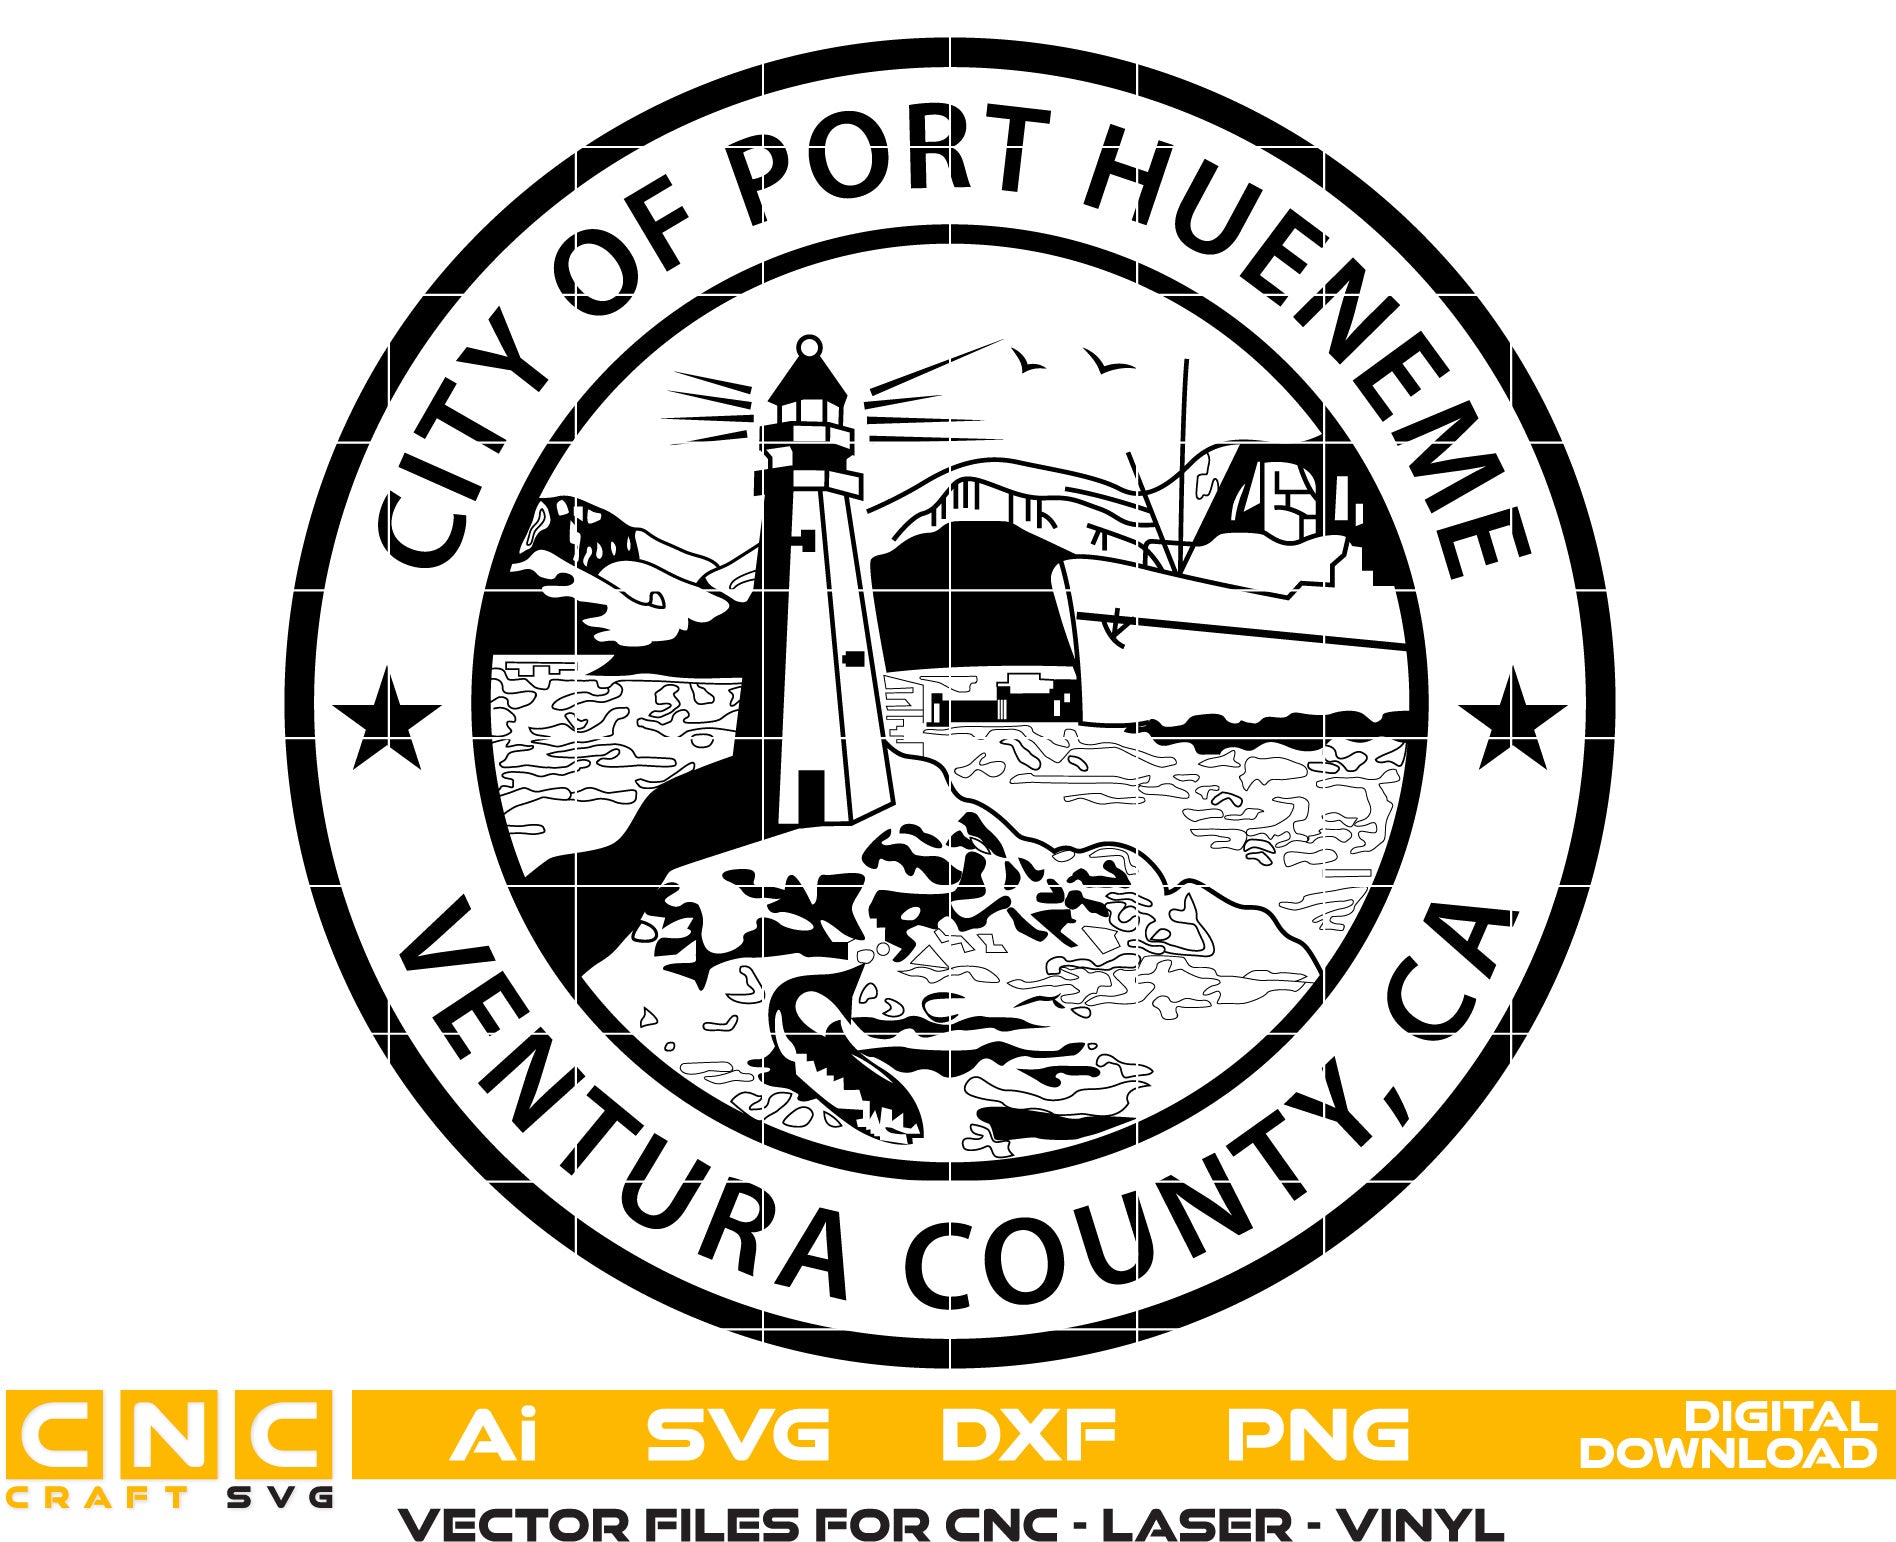 City of Port Hueneme Seal Vector Art, Ai,SVG, DXF, PNG, Digital Files for Laser Engraving, Woodworking & Printing